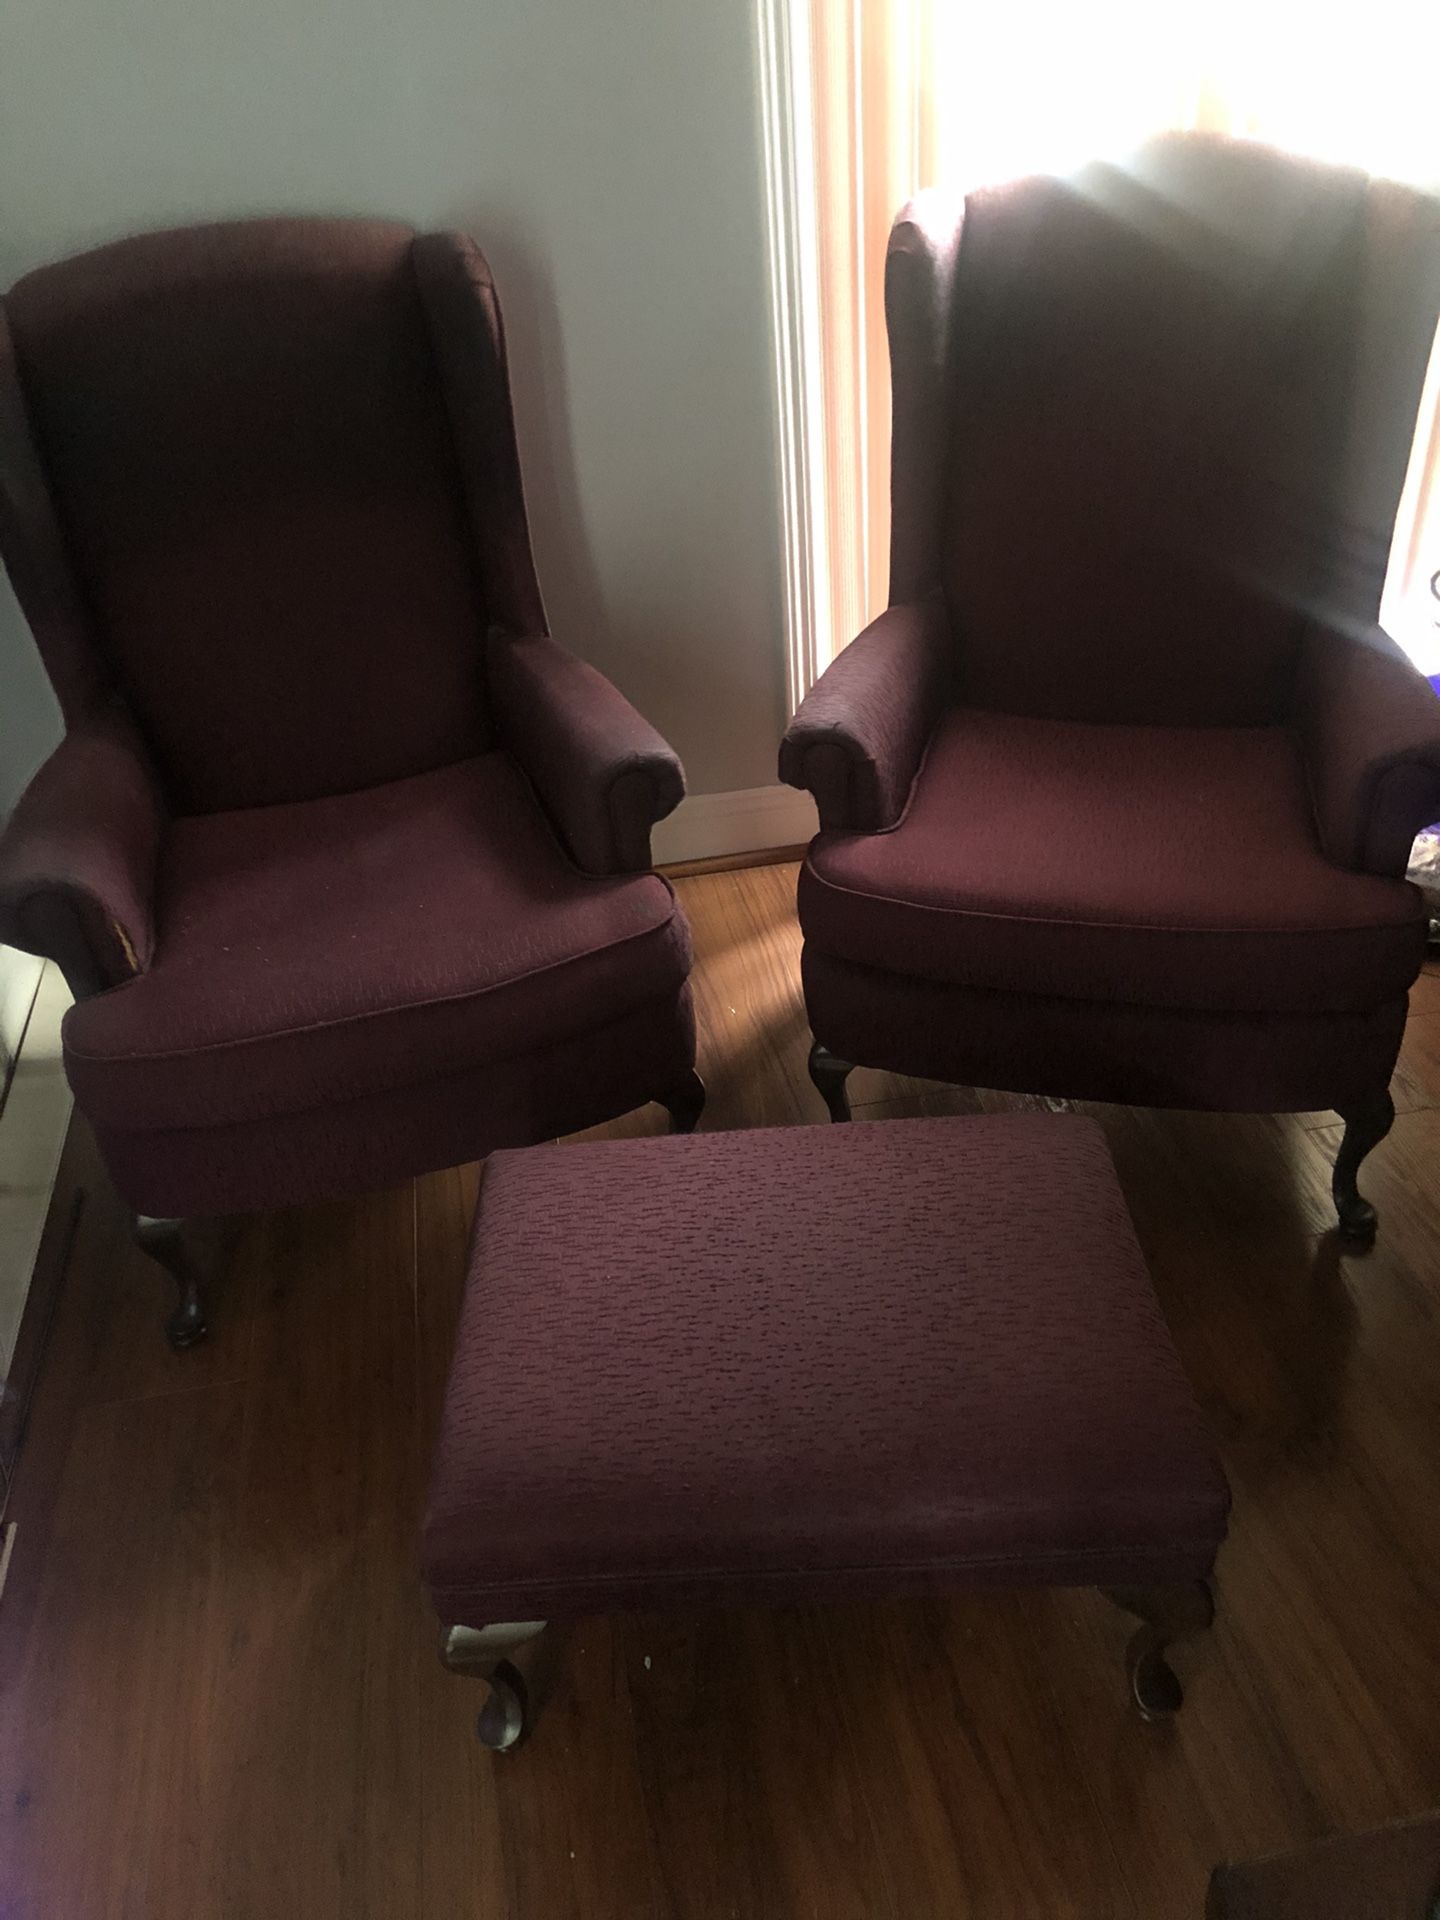 2 high back chairs